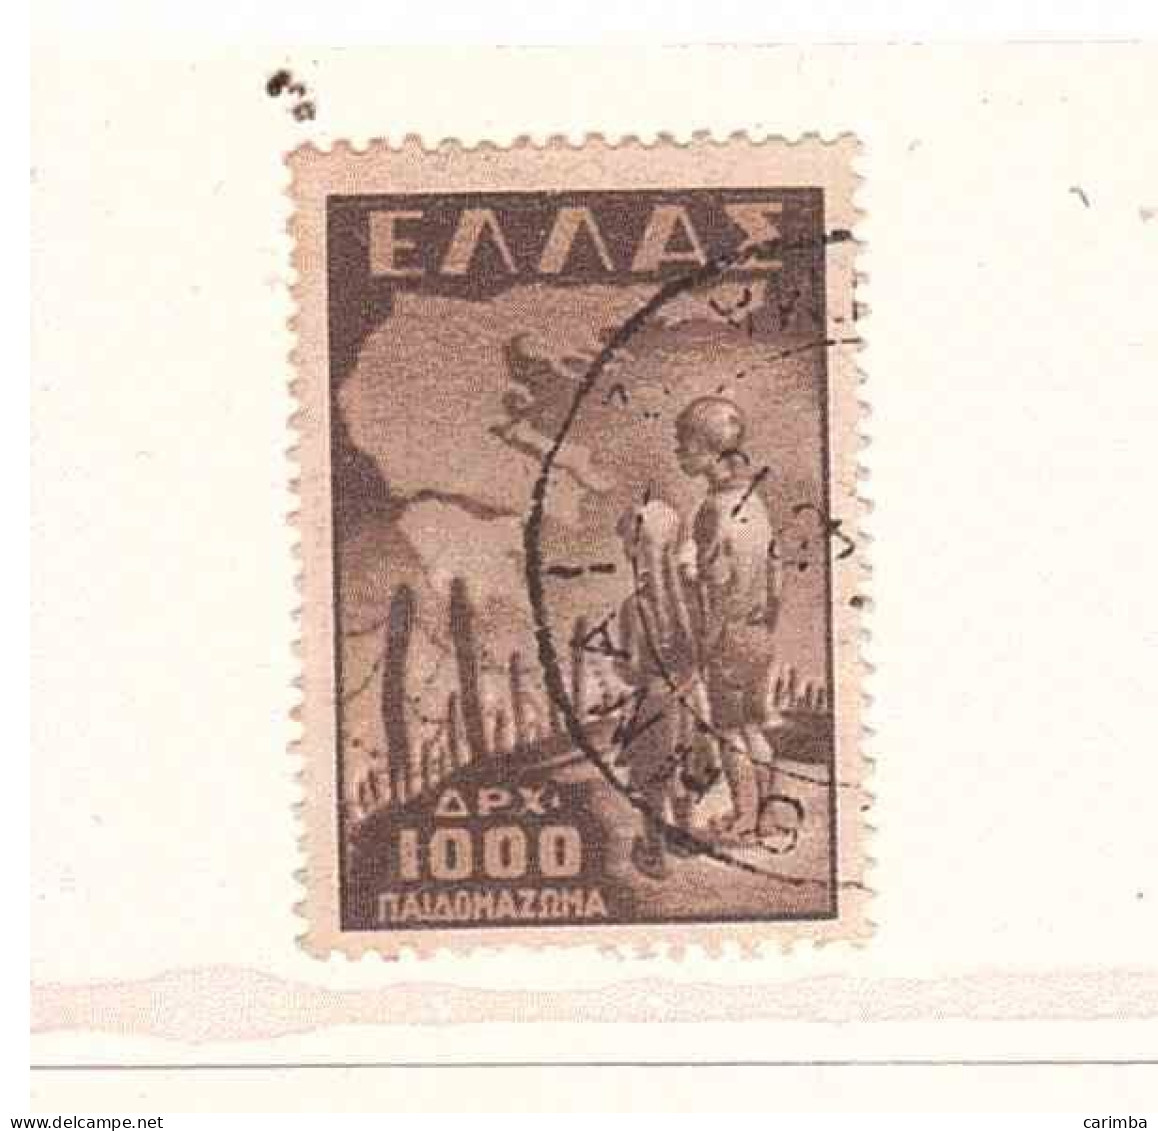 1949 APX 1000 INFANZIA DEPORTATA - Used Stamps